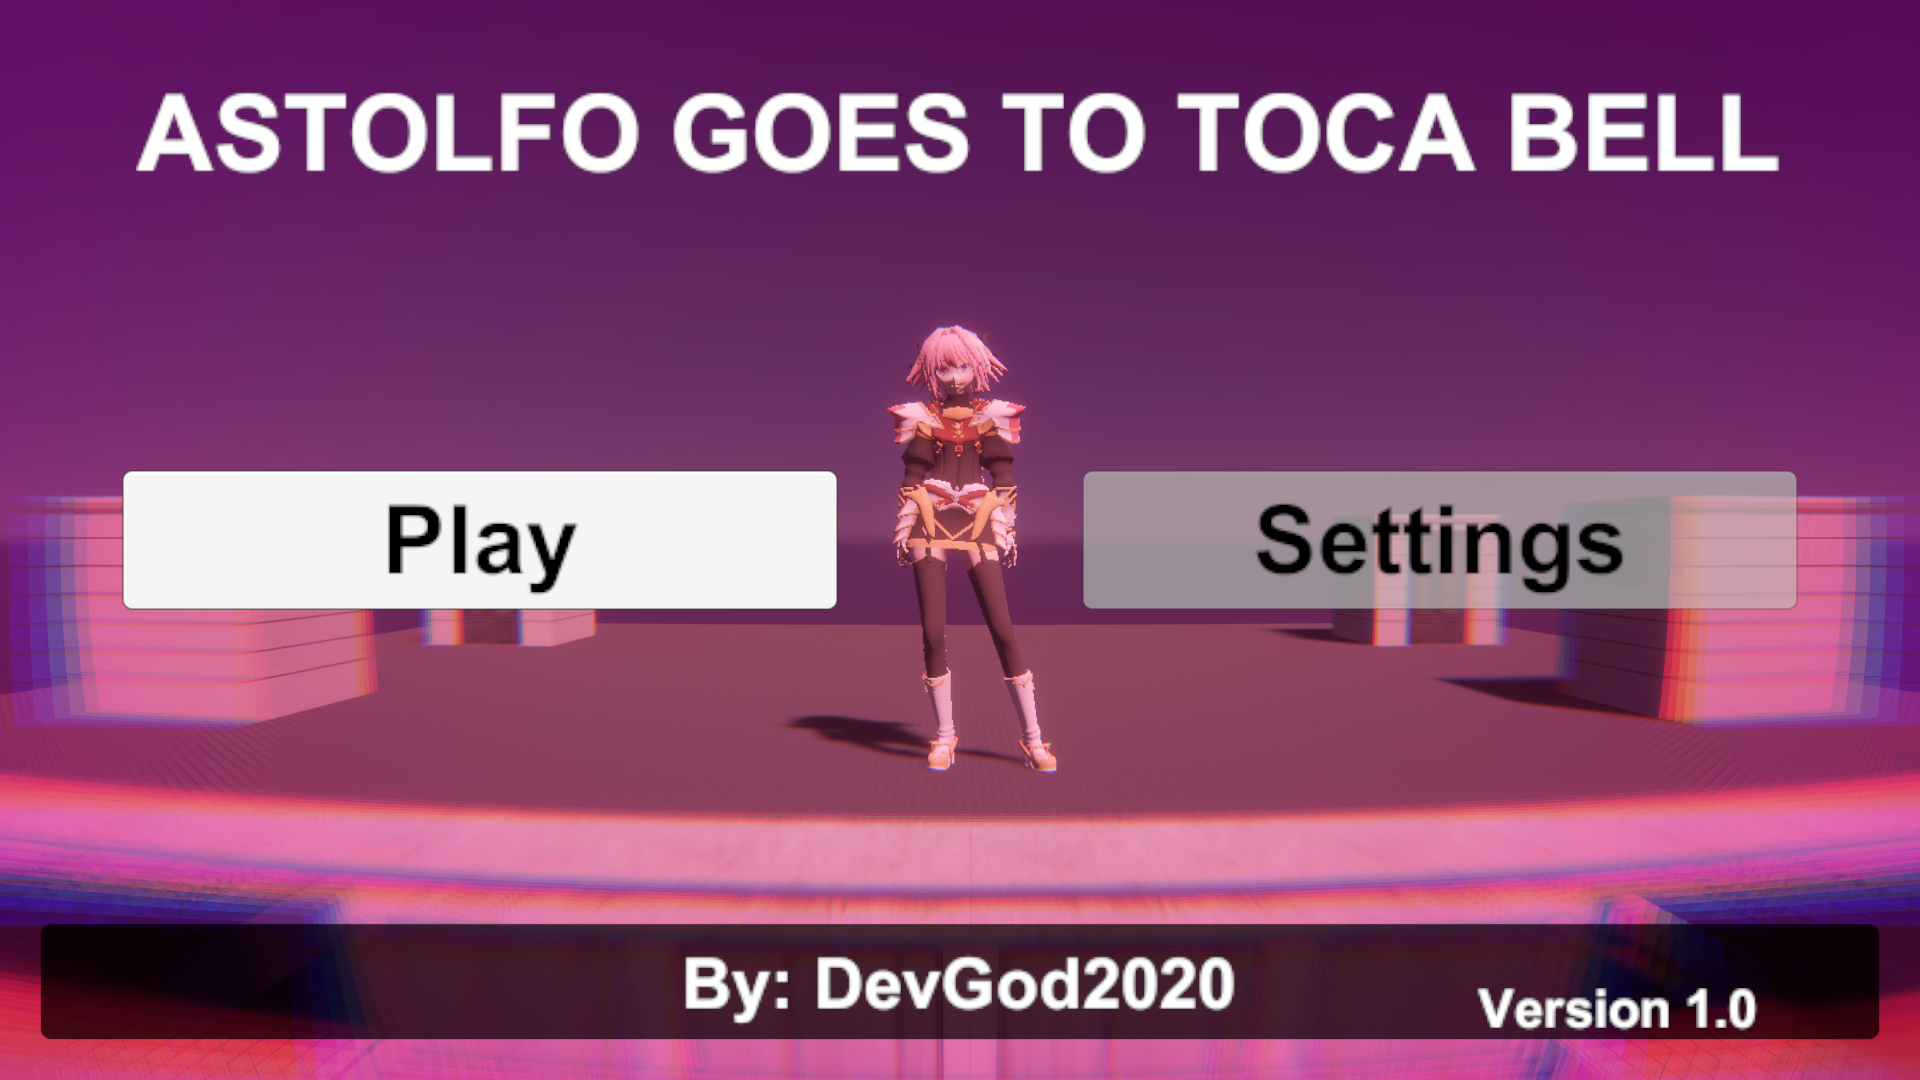 Astolfo goes to toca bell